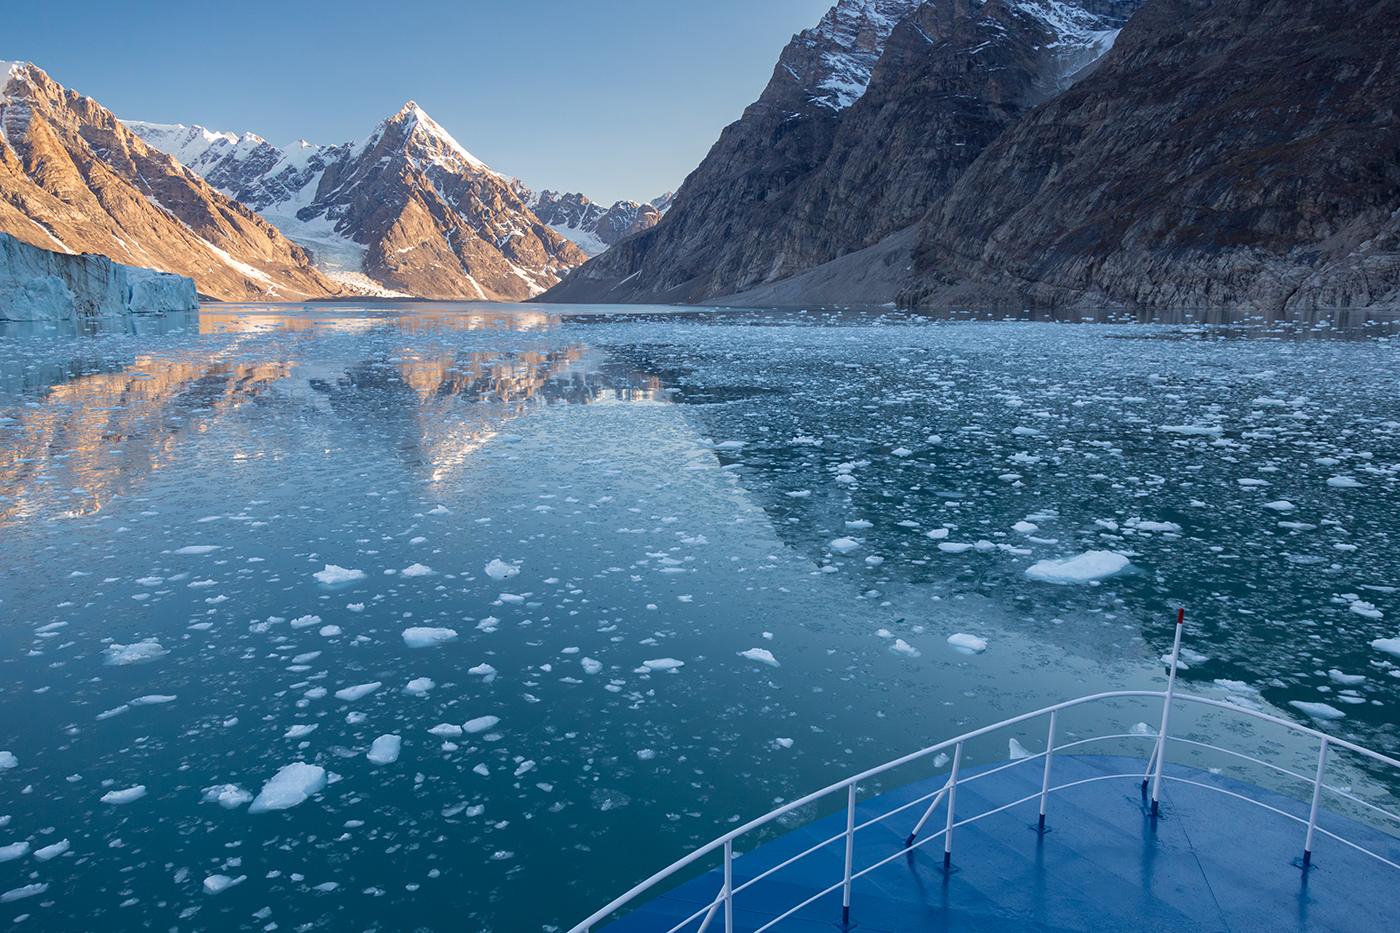 A Quark Expeditions ship nears Alpefjord, Northeast East Greenland National Park, the sight of glacier calving.